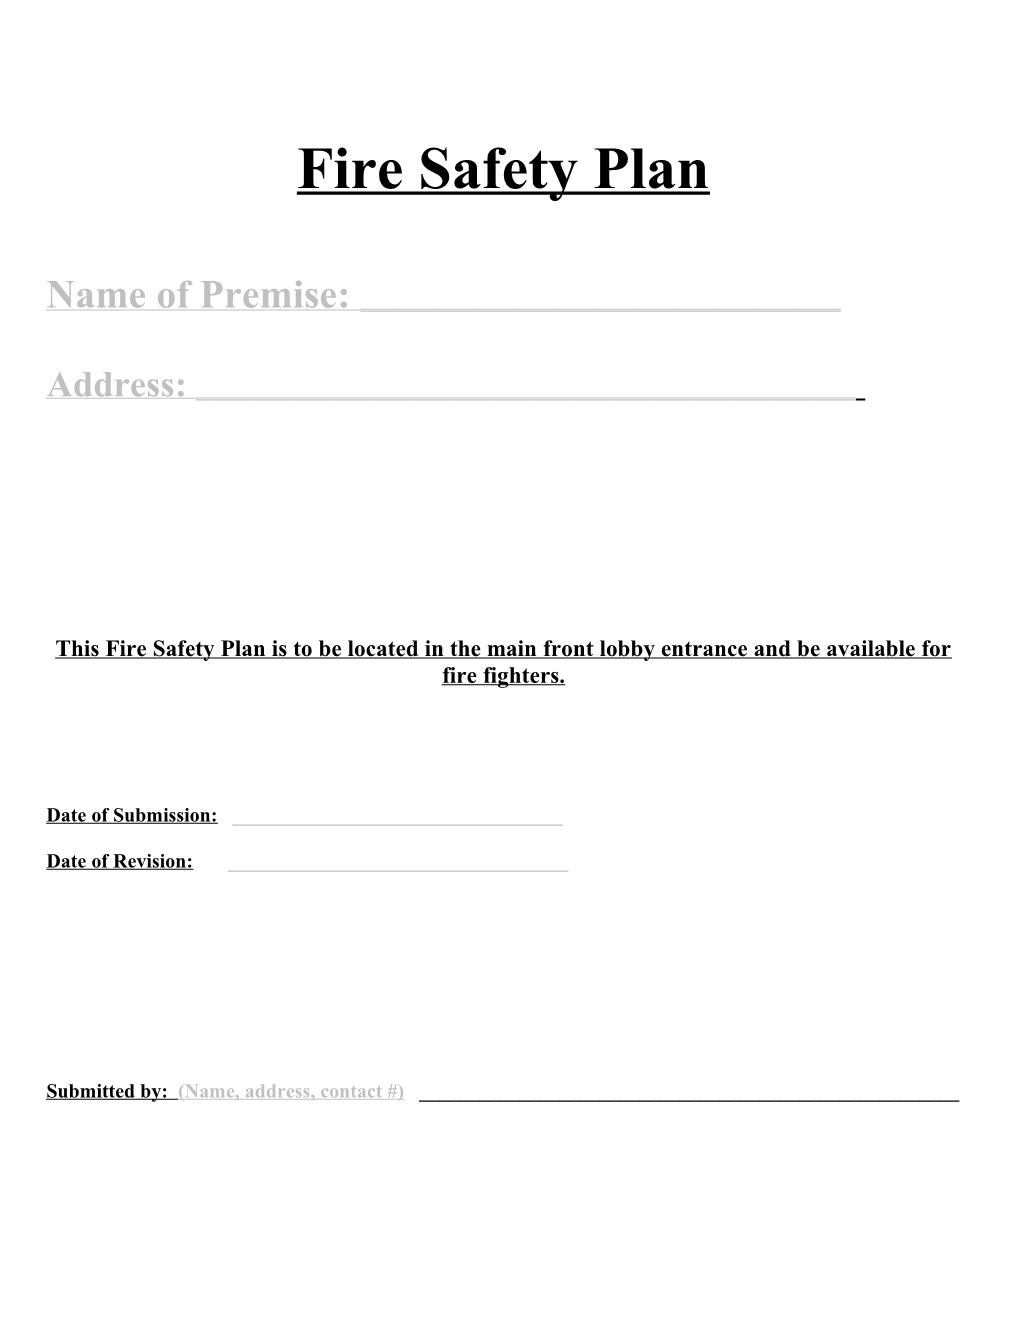 Purpose of the Fire Safety Plan